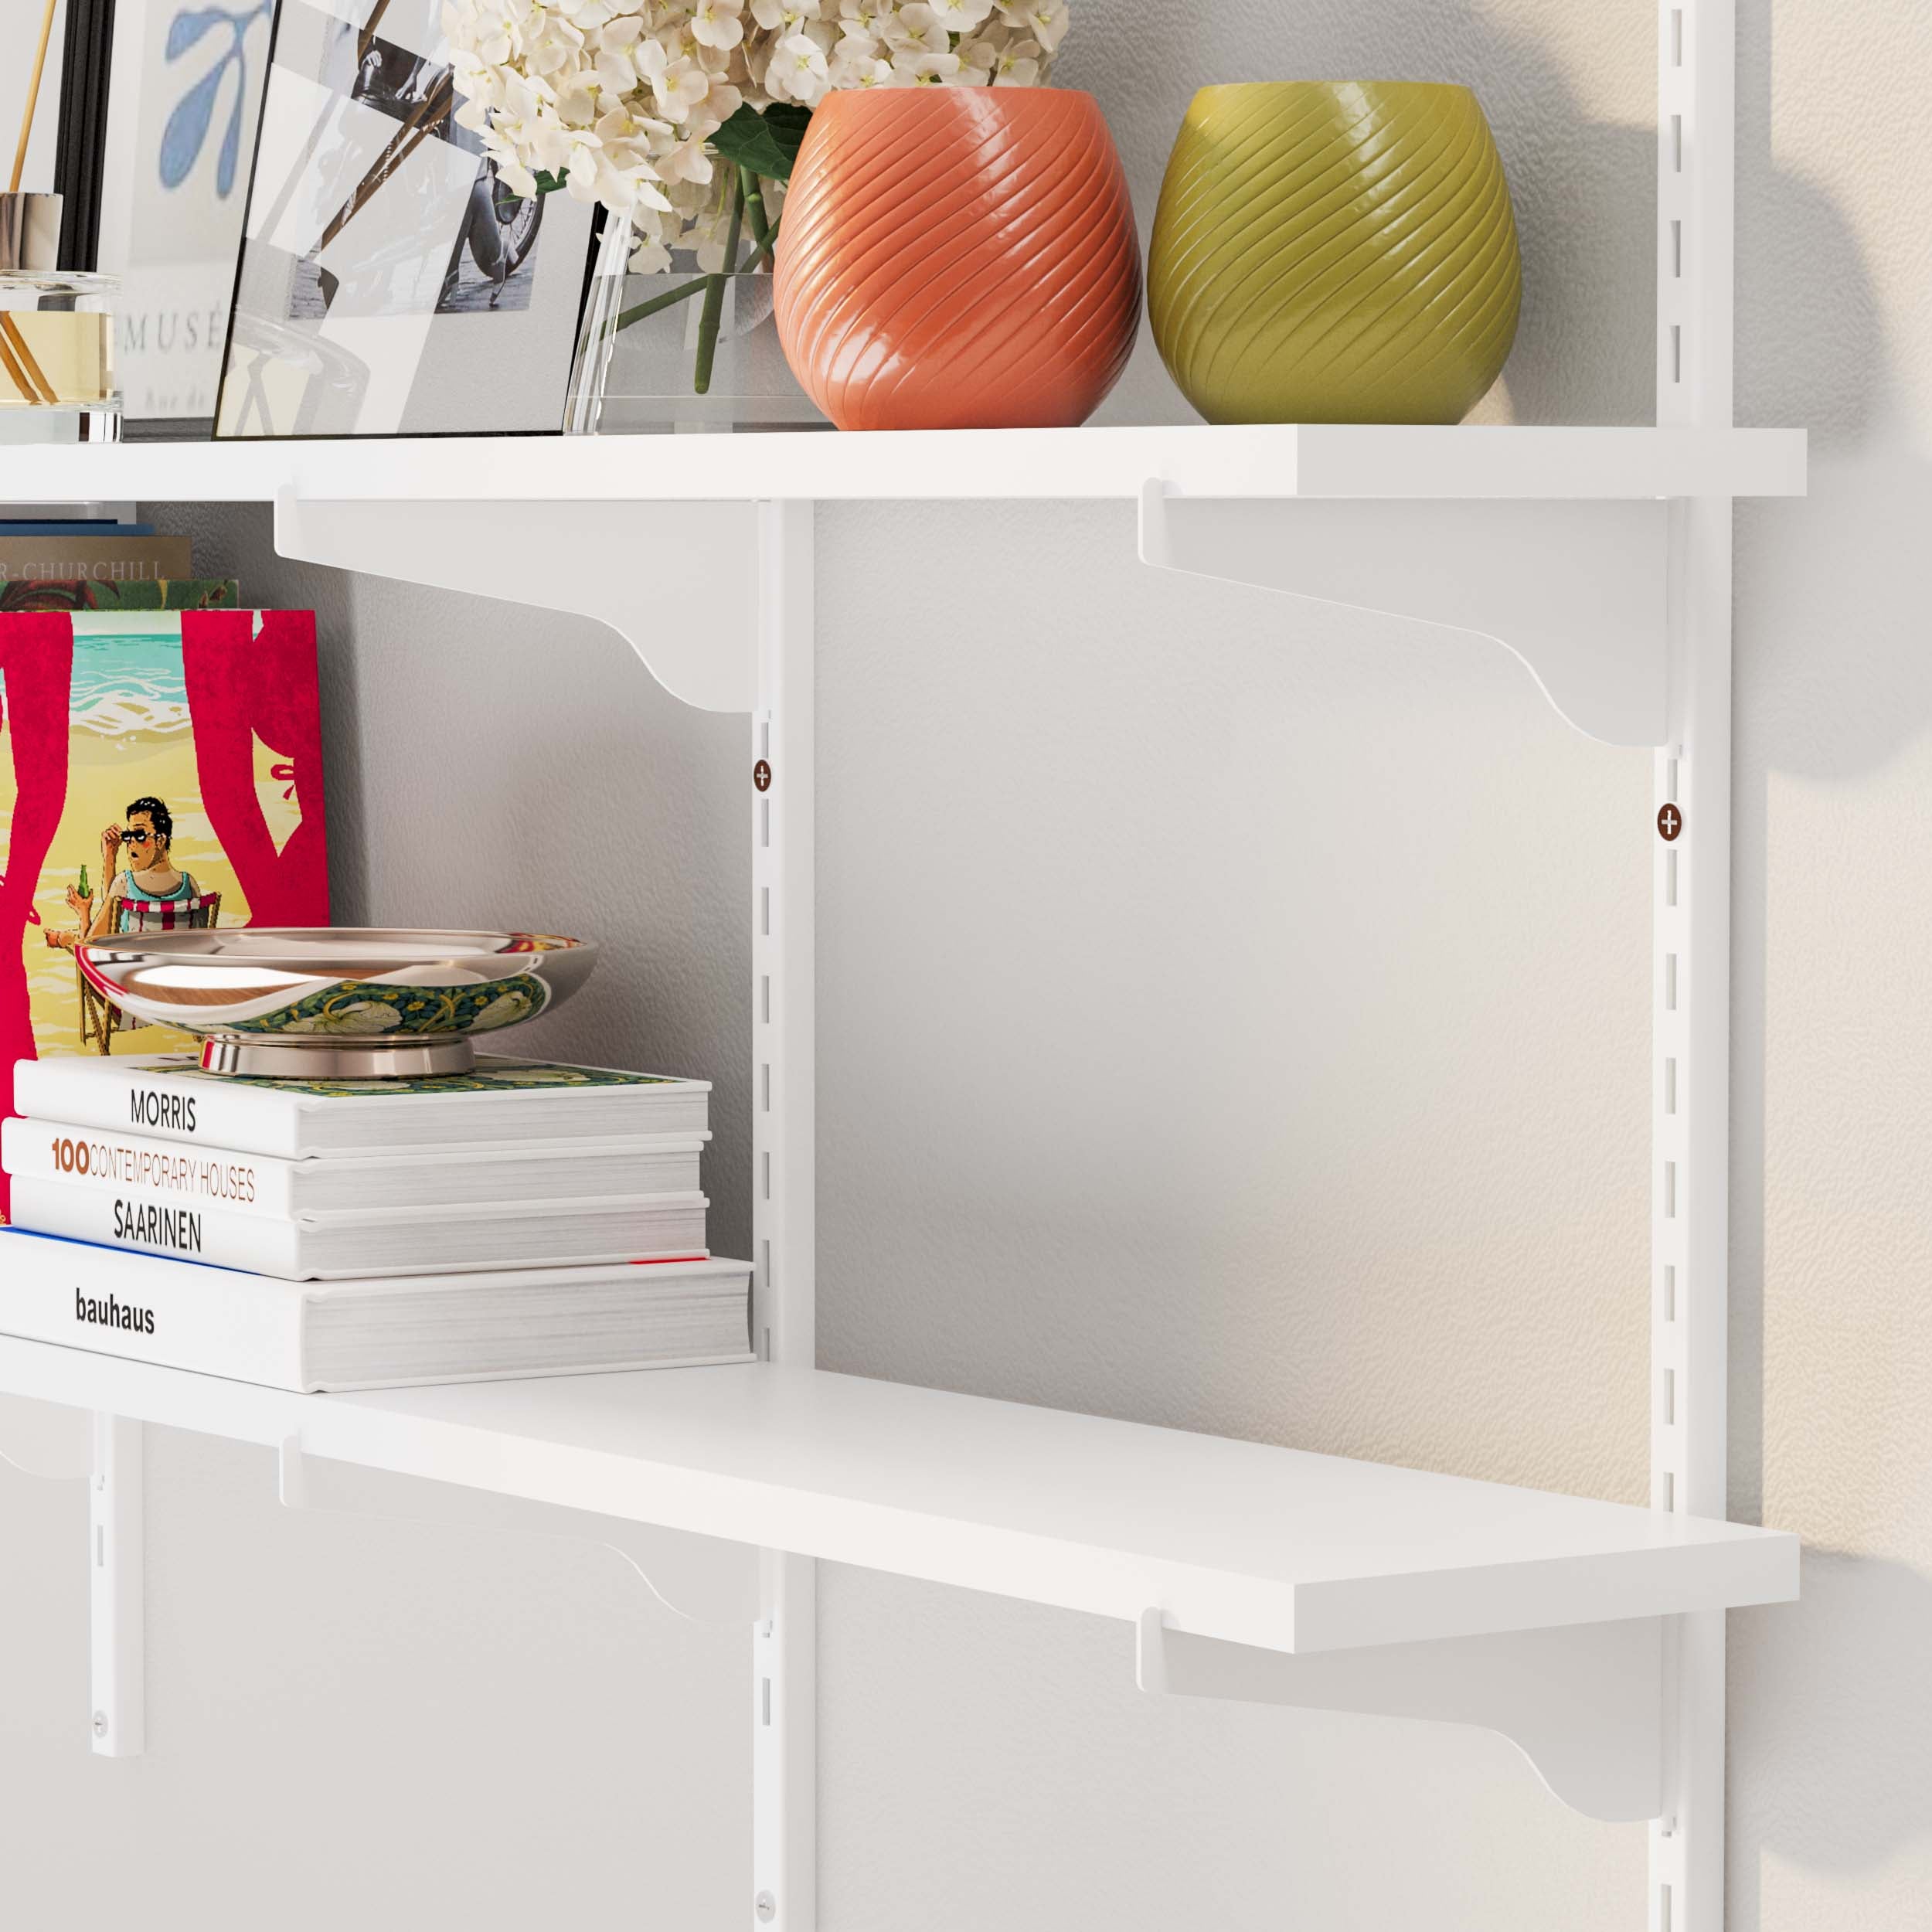 A close-up of white adjustable shelves with colorful vases, a tray, and a stack of books.